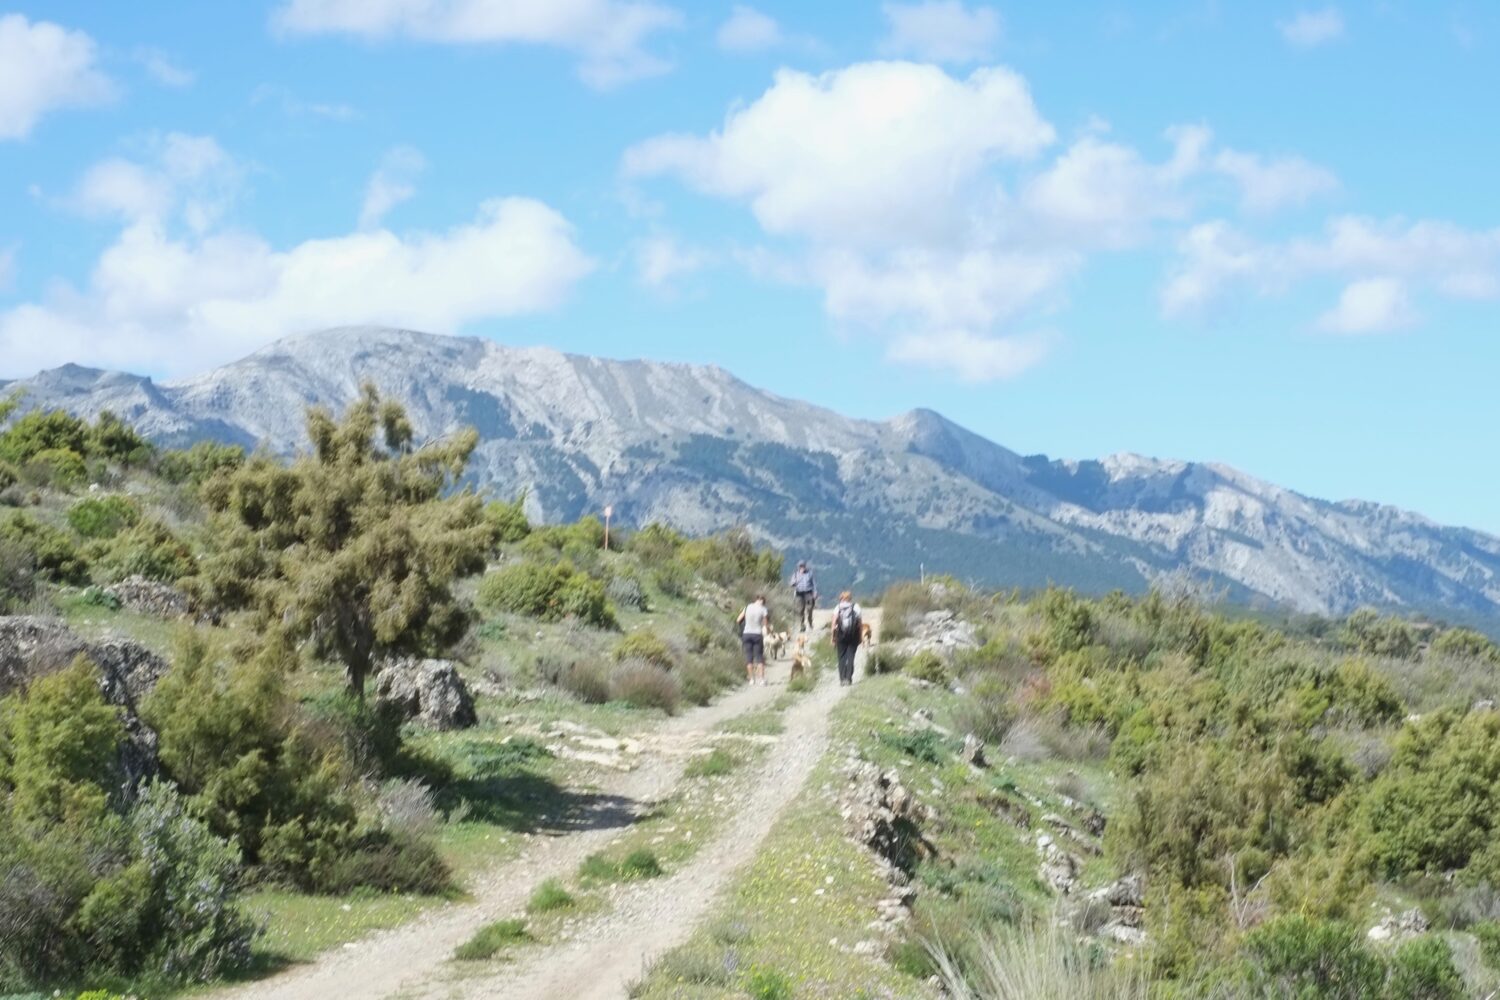 Scenic view of hiking trail in Andalucia, Spain with mountains in the distance